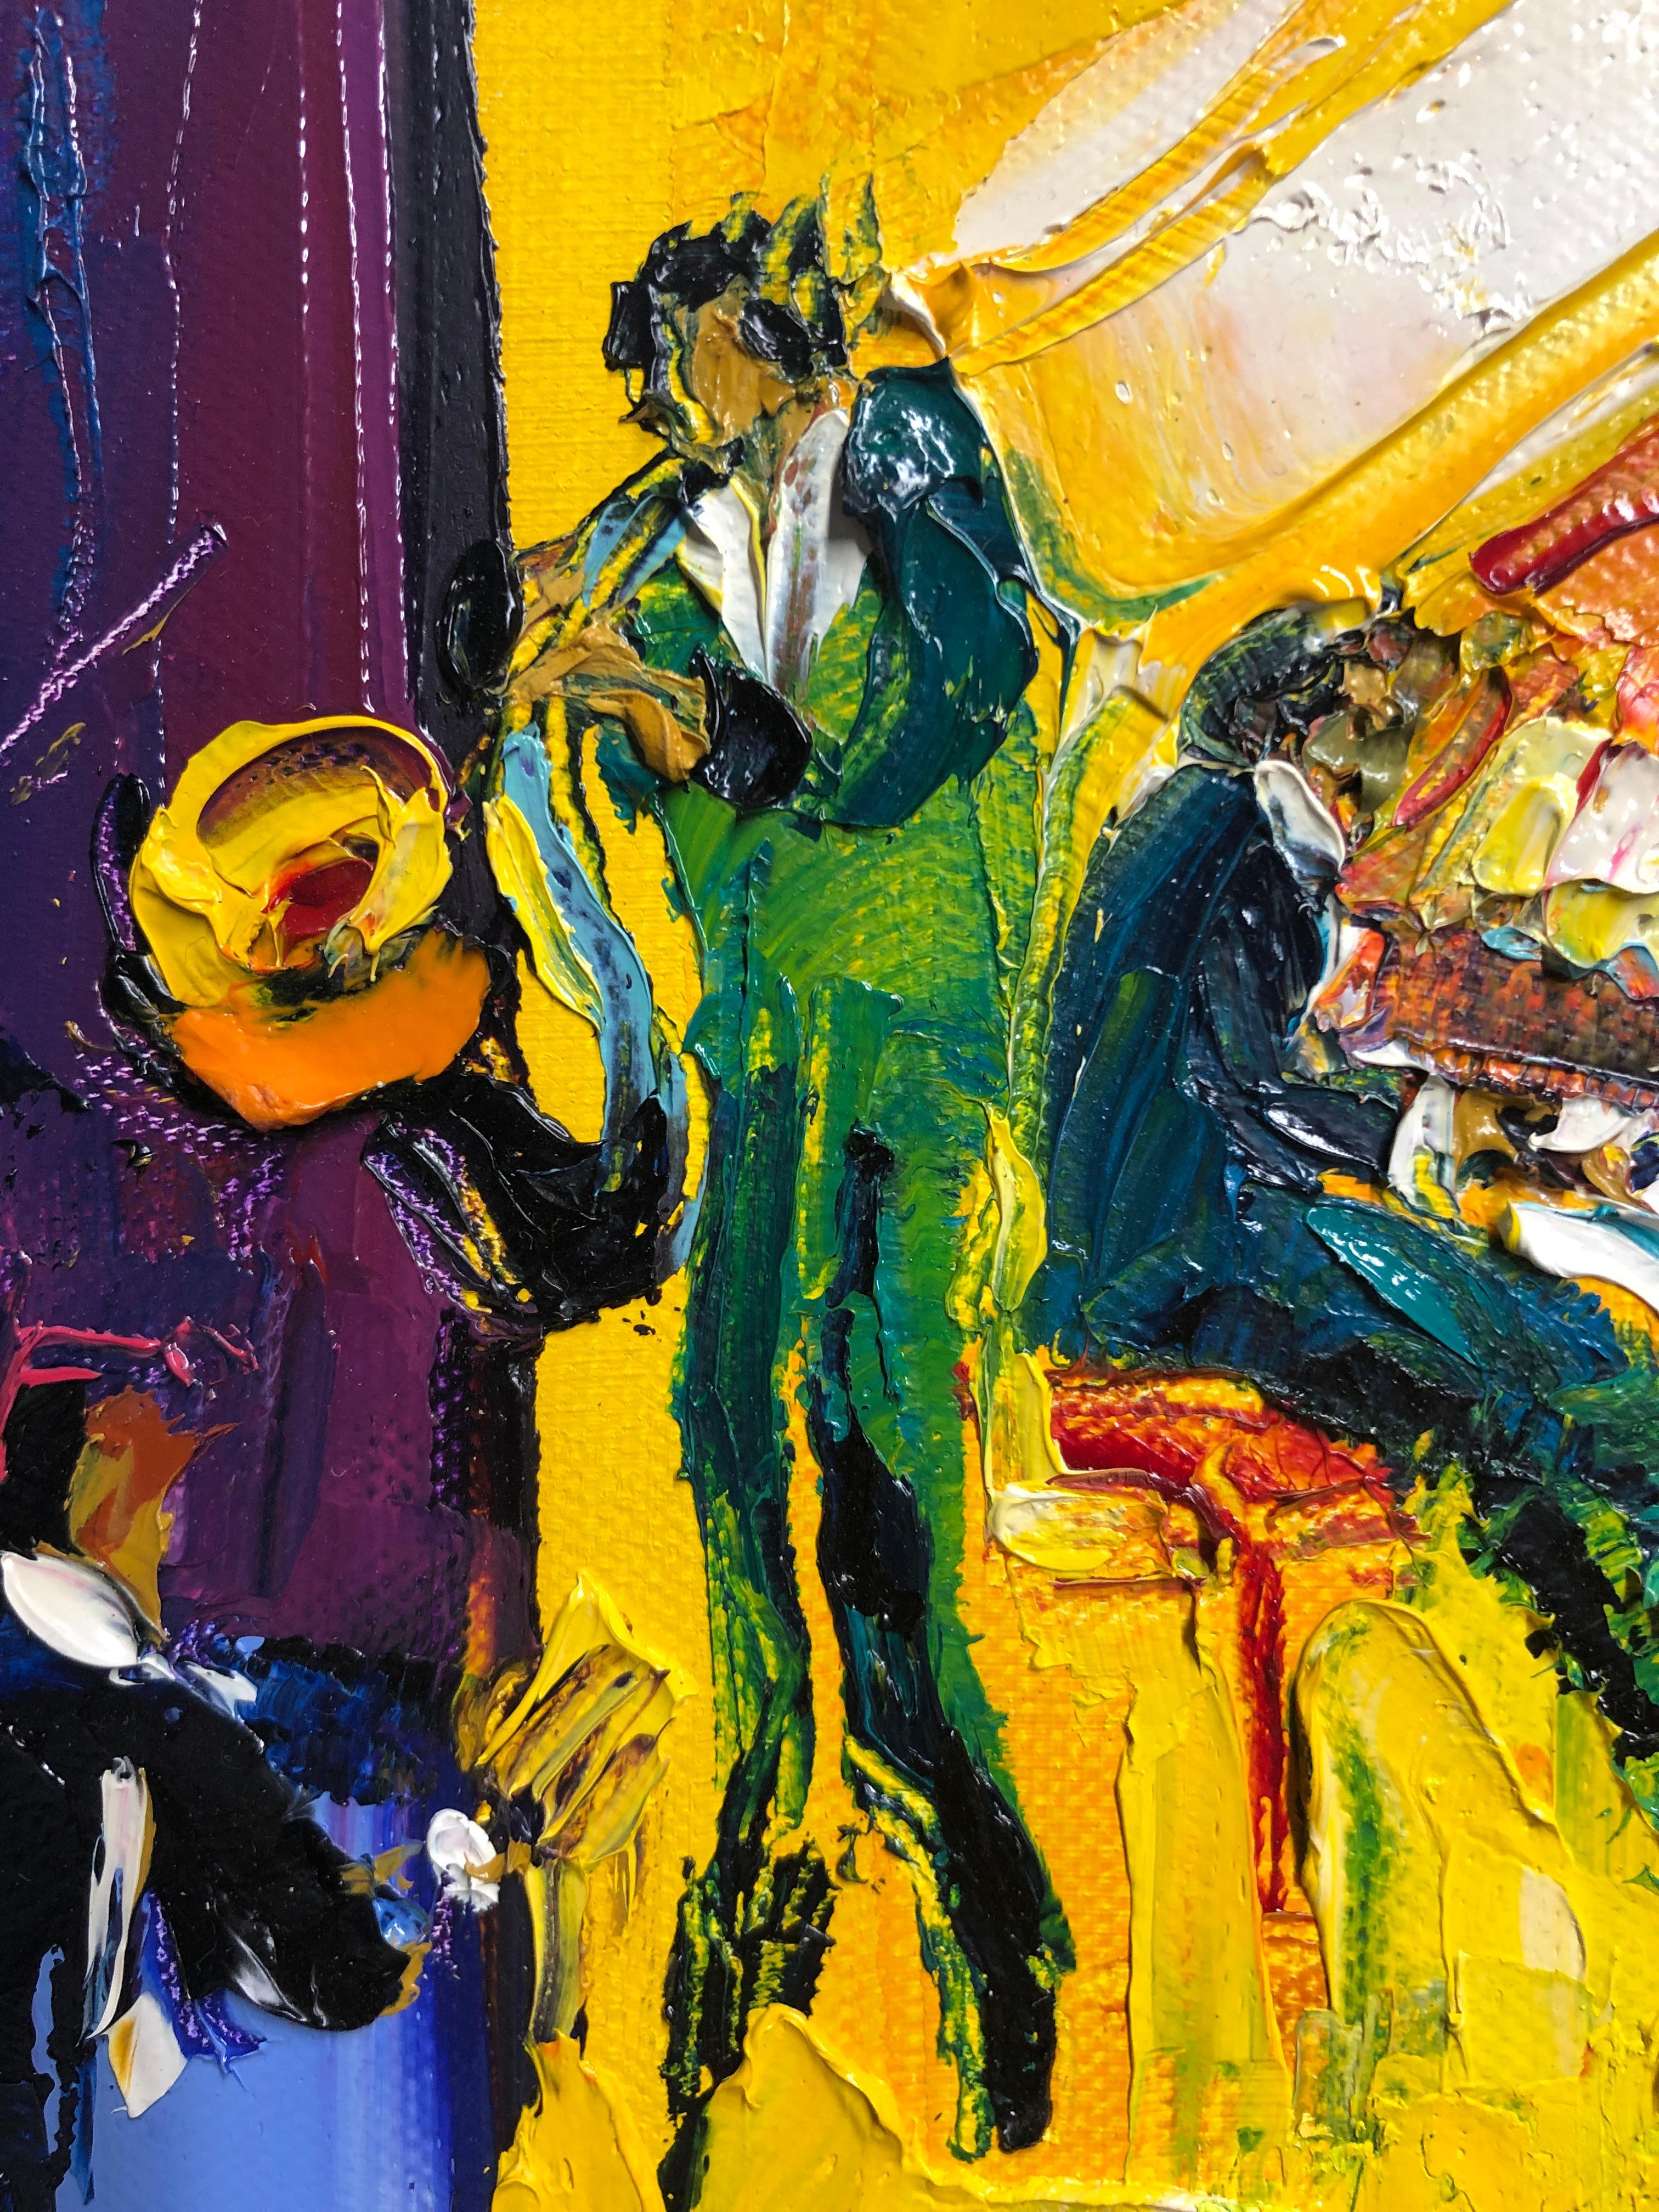 Jazz Painting Oil on Canvas Palette Knife 14 x 10